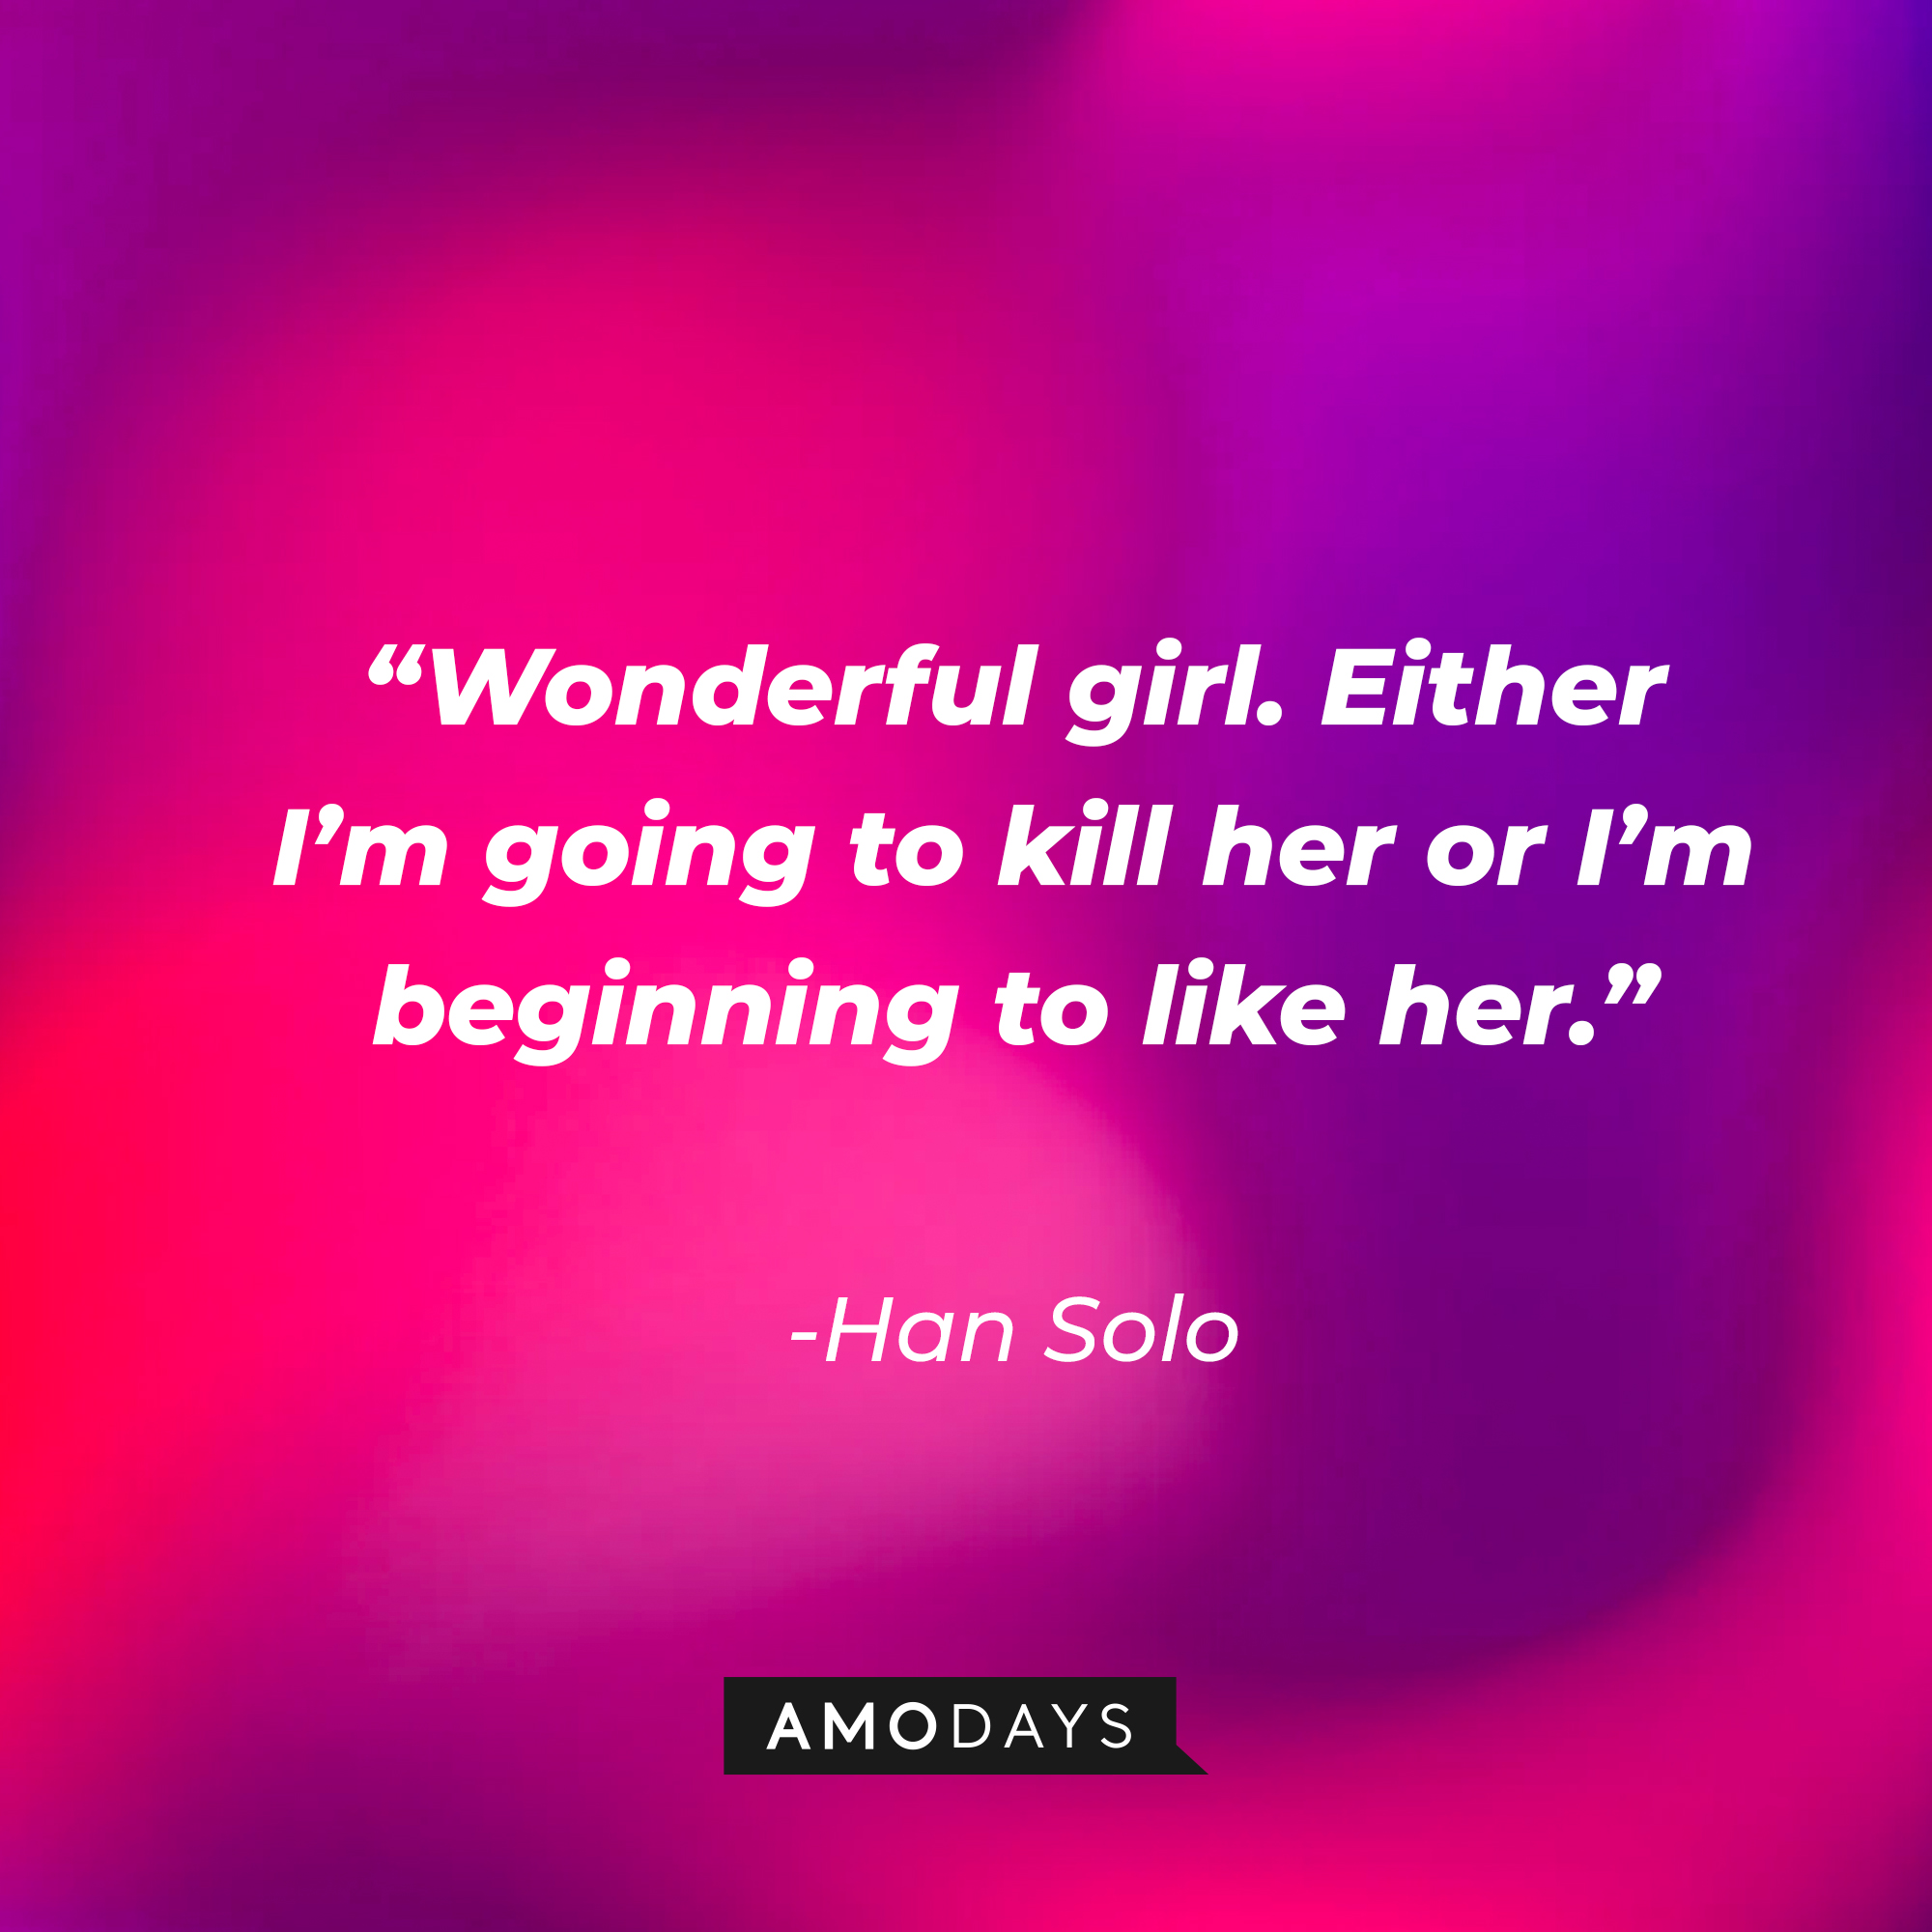 Han Solo's quote: "Wonderful girl. Either I'm going to kill her or I'm beginning to like her." | Source: facebook.com/StarWars